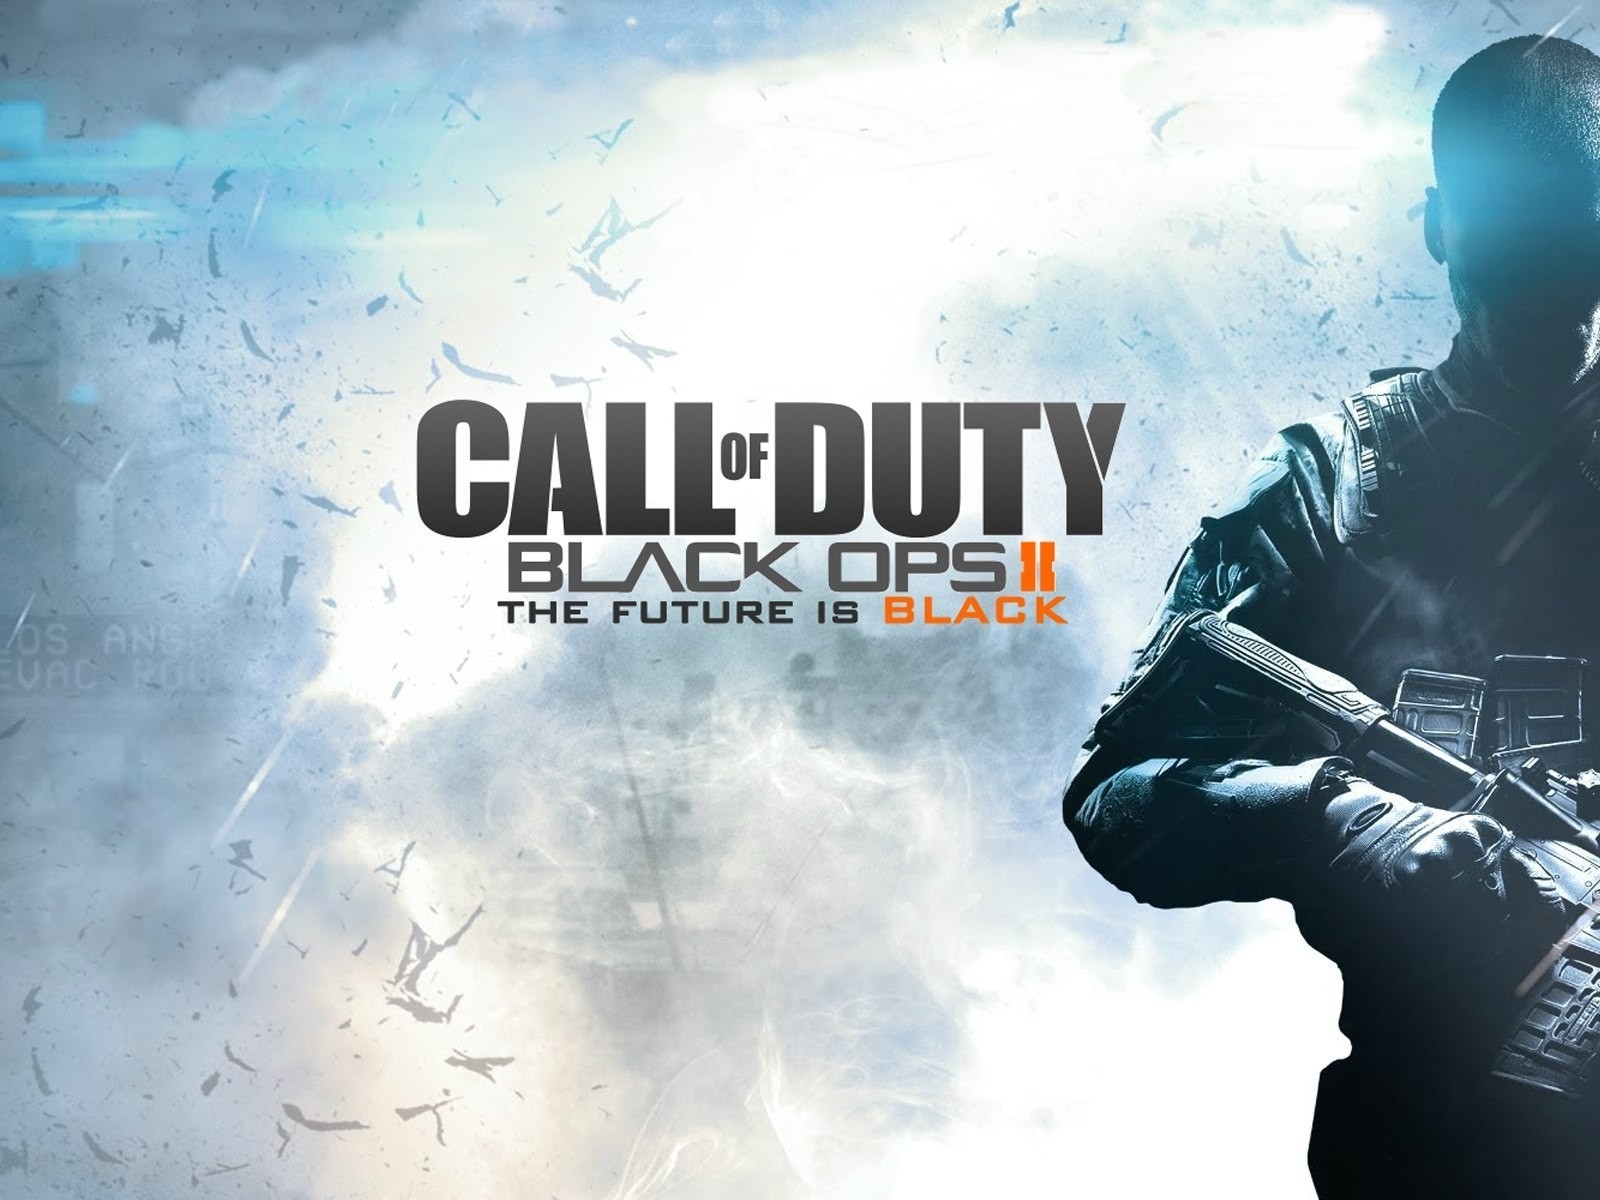 Call of Duty Black Ops 2 Future Black for 1600 x 1200 resolution